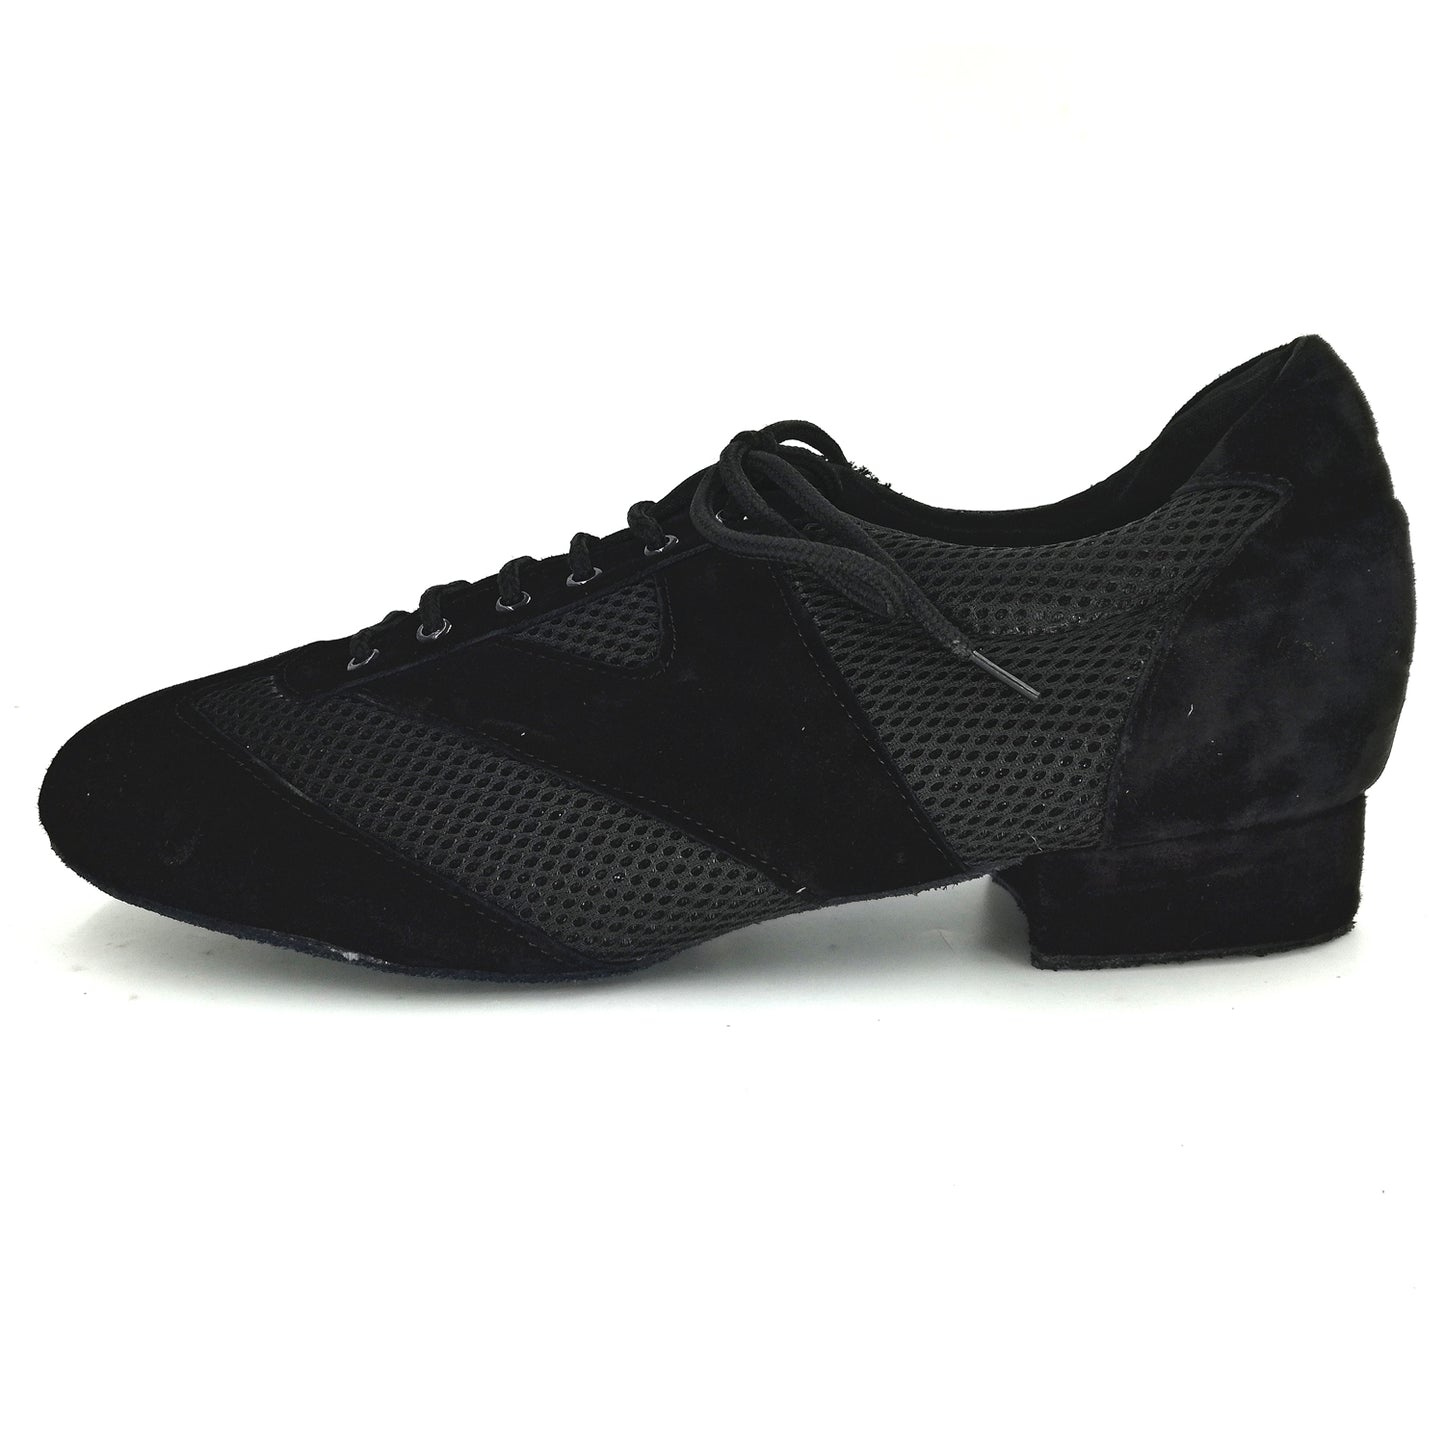 Pro Dancer Argentine Tango Practice Shoes Men Leather Sole 1 inch Heel Lace-up Black and Gray (PD-4003A)